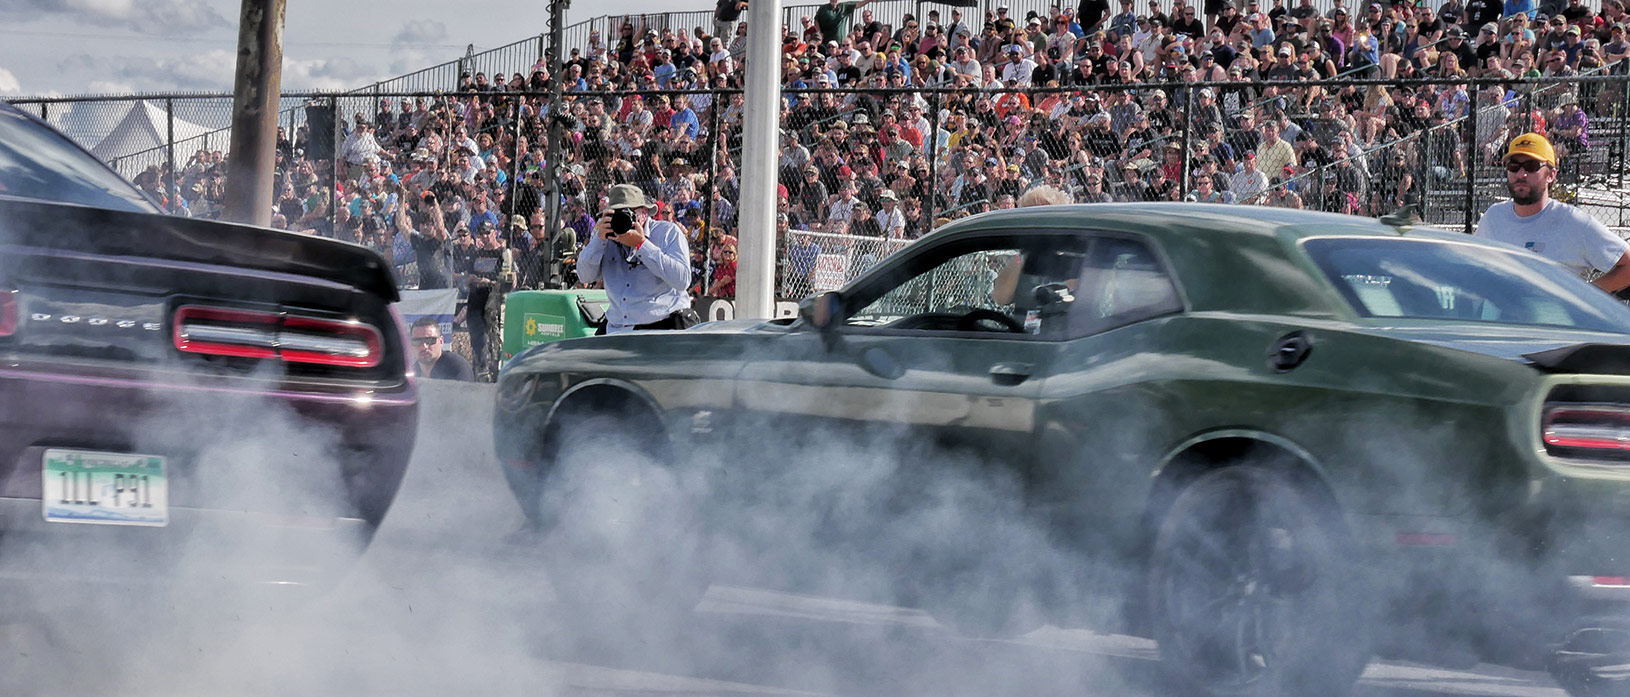 Fifth Annual “Roadkill Nights Powered by Dodge” Draws Nearly 50,000 Performance Enthusiasts to Street-legal Drag Racing on Woodward Avenue